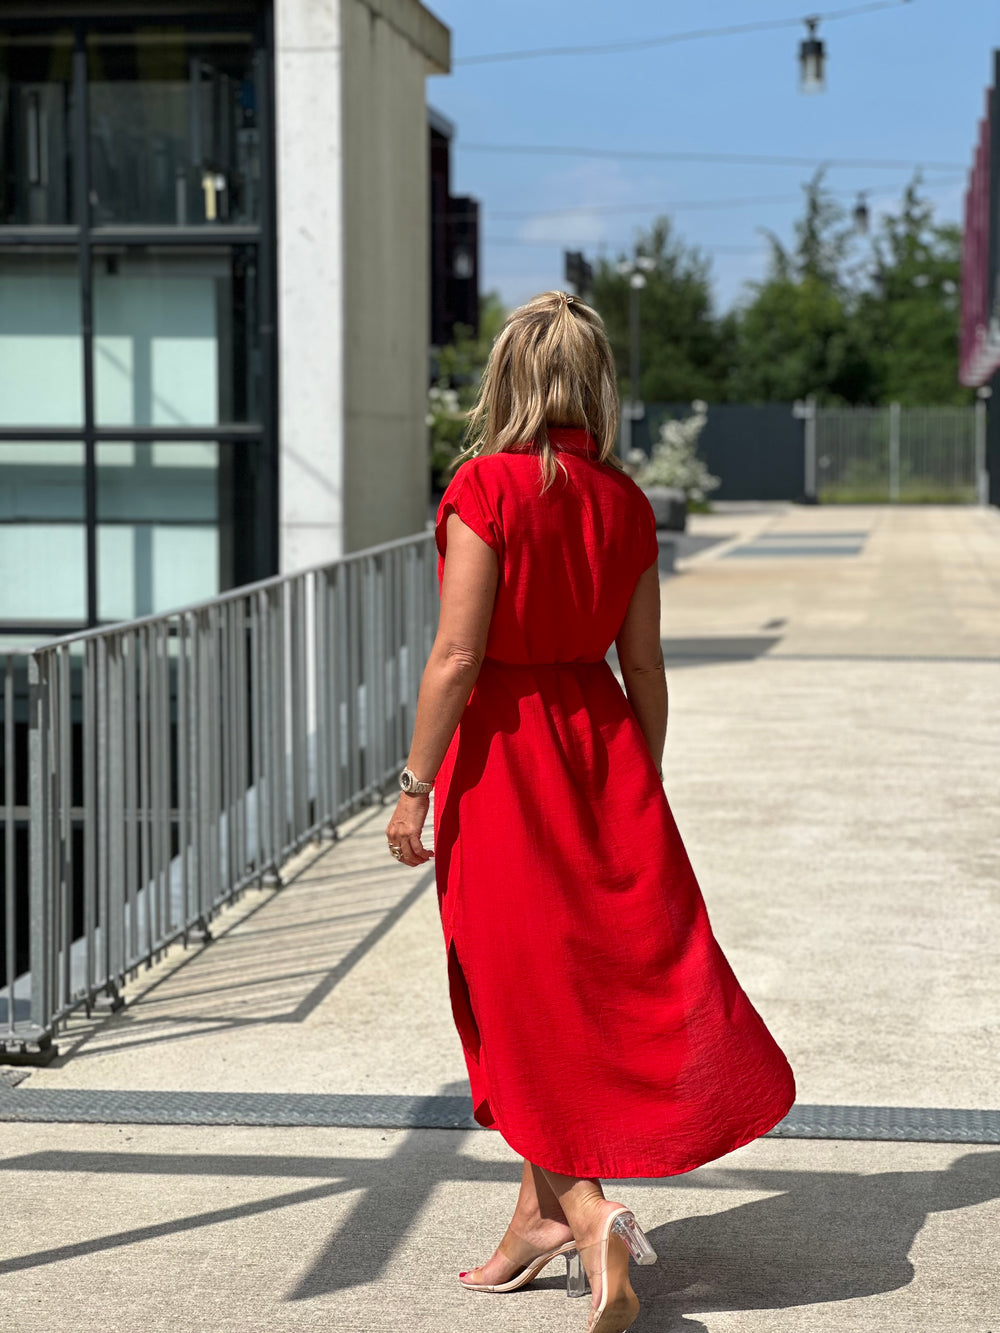 Robe fluide rouge